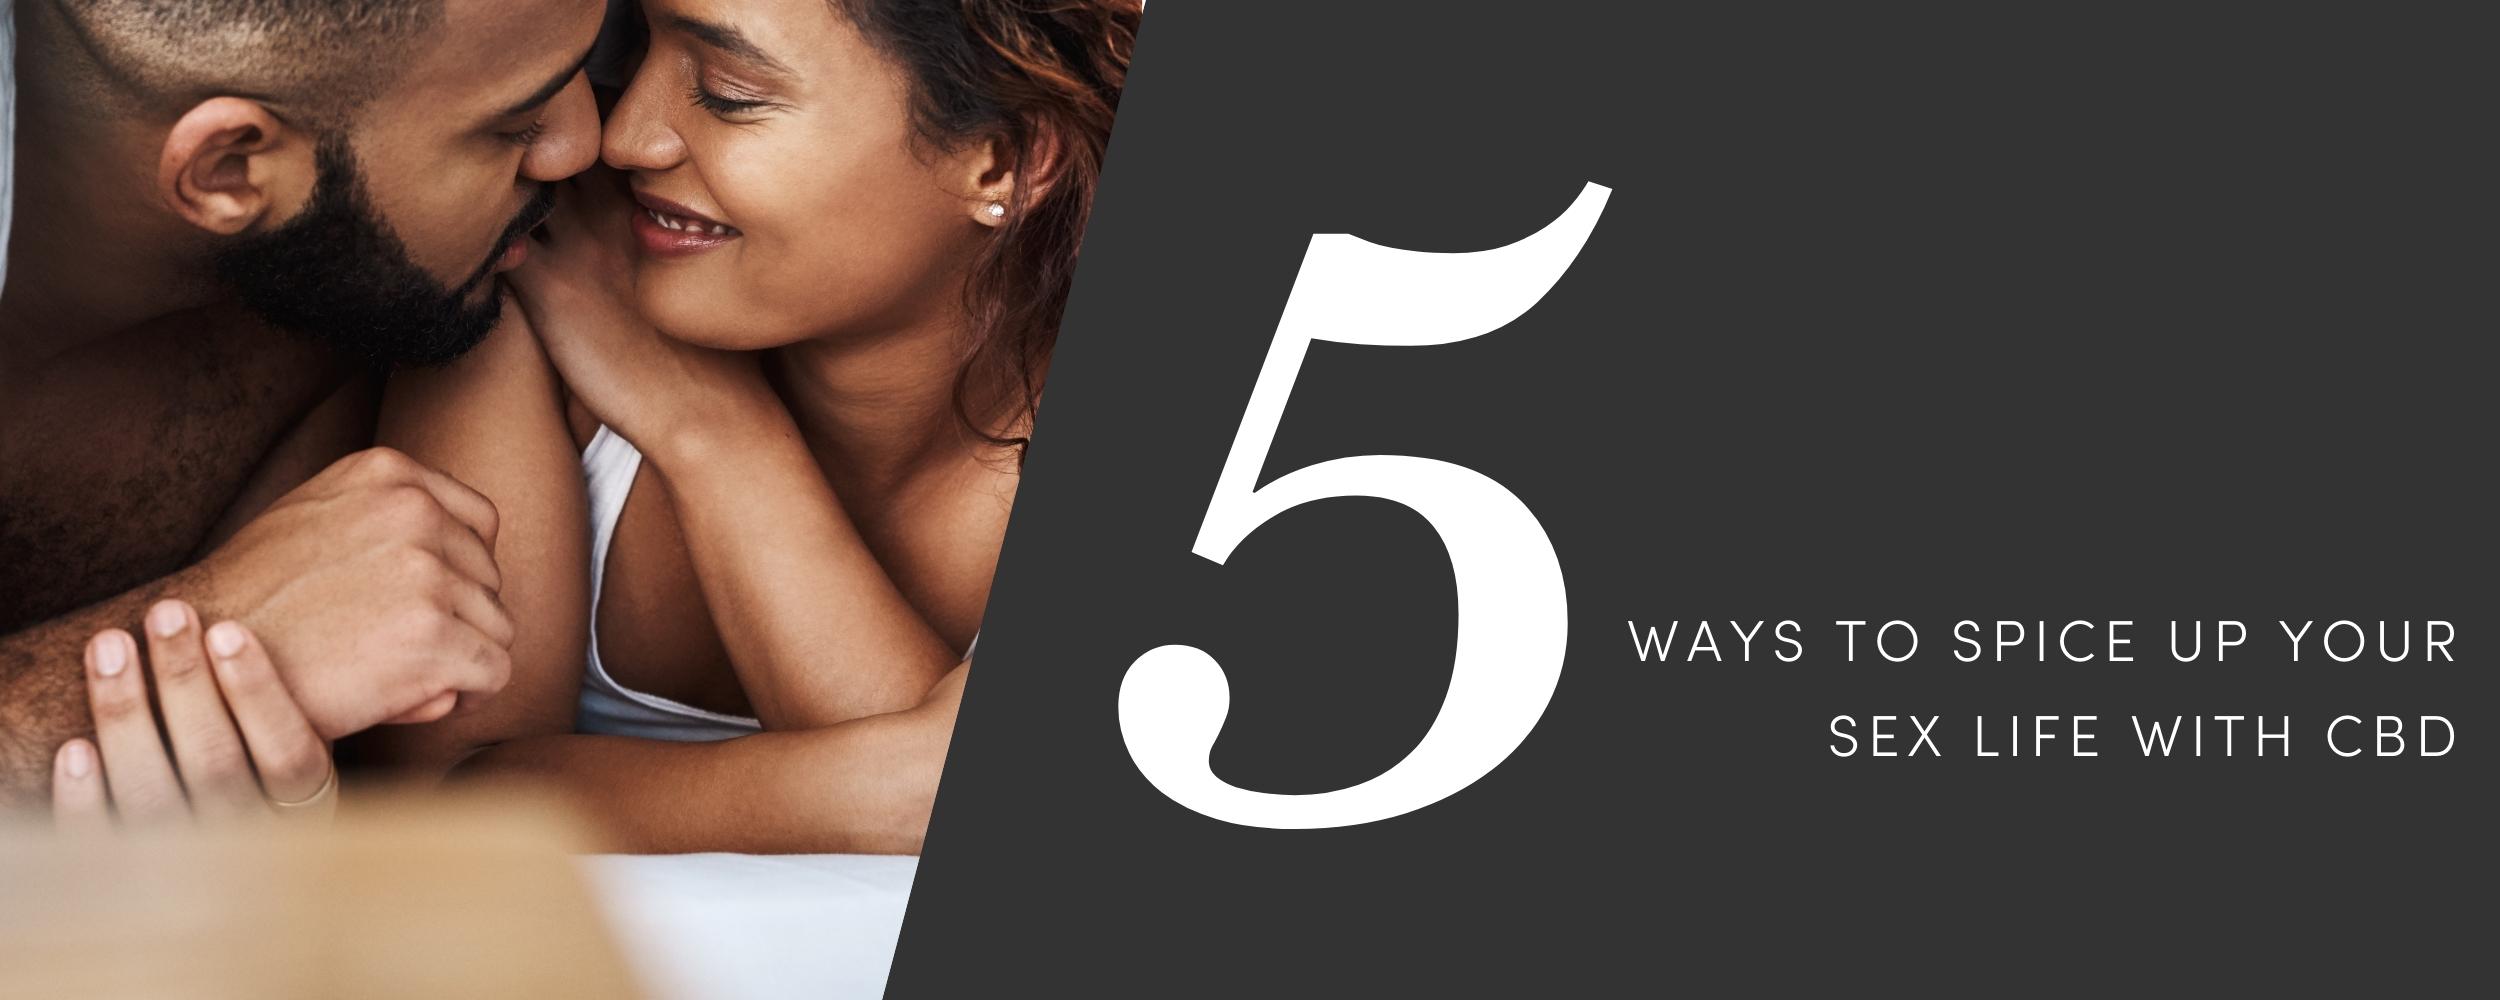 CBD for Sex 5 Ways to Spice Up Your Sex Life